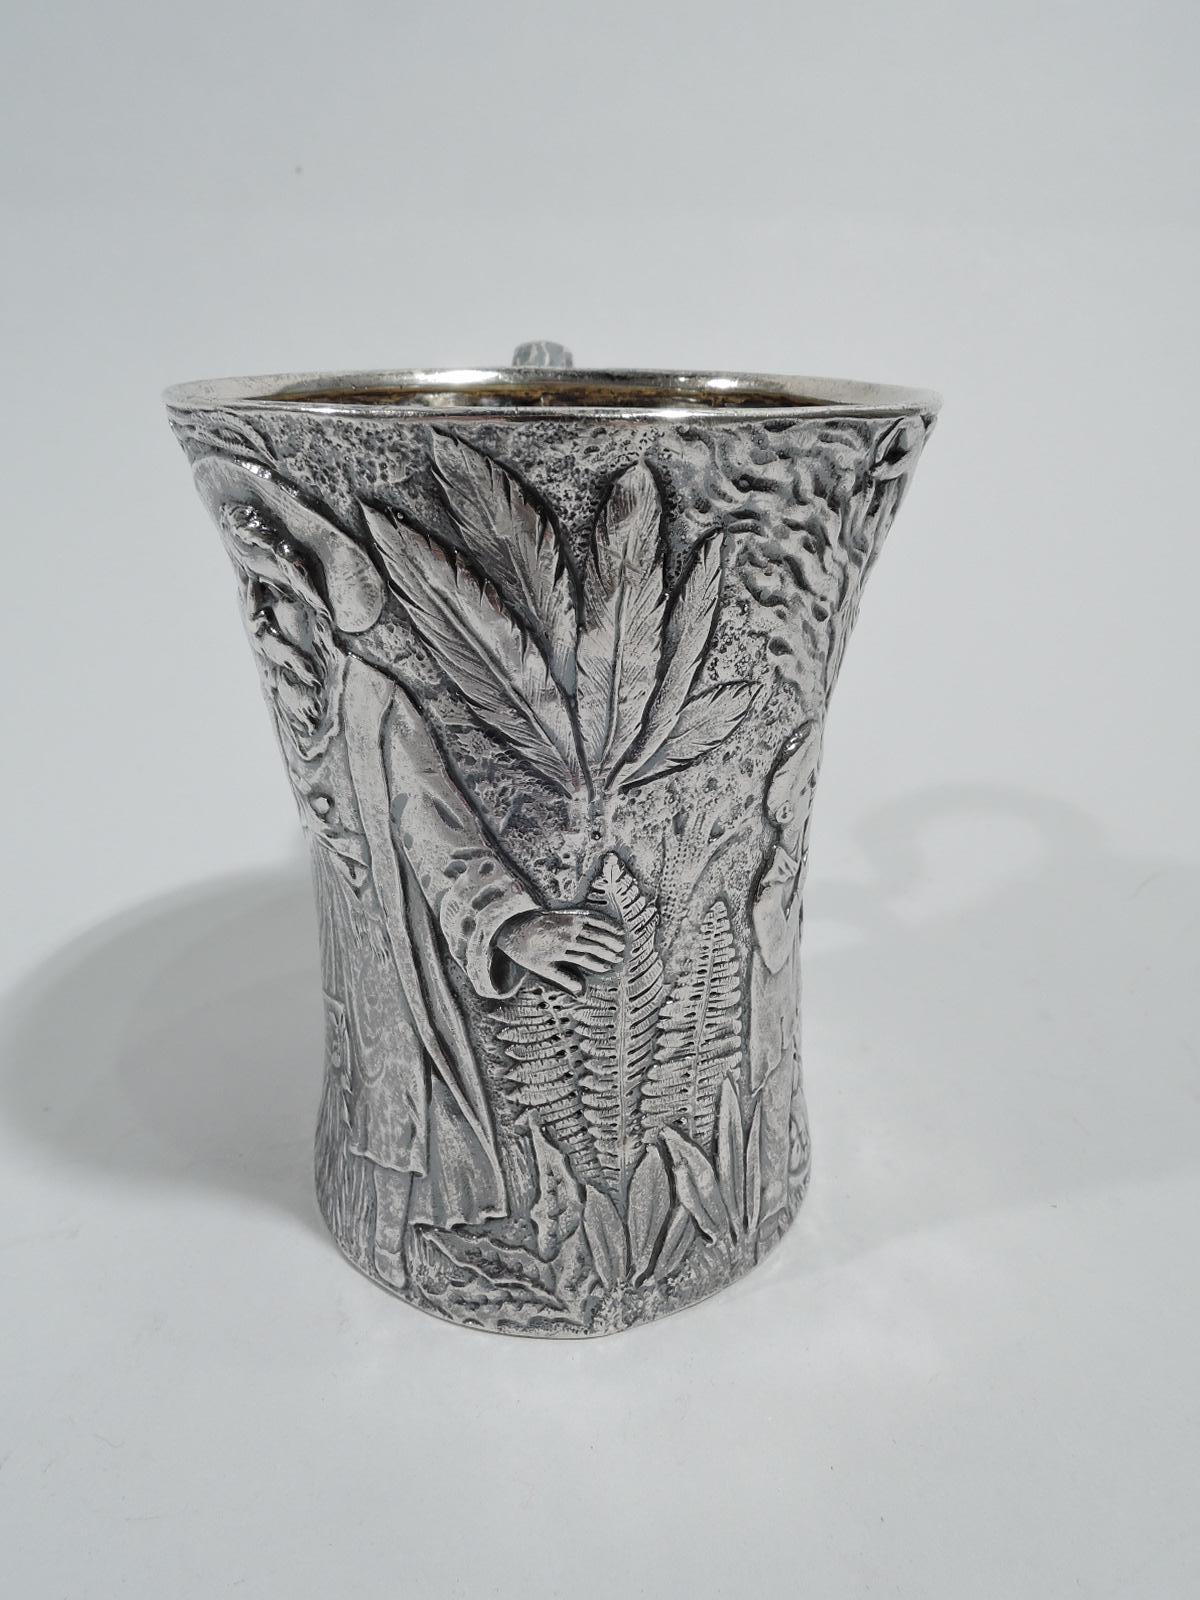 Unusual sterling silver baby cup. Made by Tiffany & Co. in New York. Tall and waisted with dense low-relief frieze depicting 2 boys, one holding a genie lamp and the other heaving a case out of the ground, as well as 2 magical or divine figures of